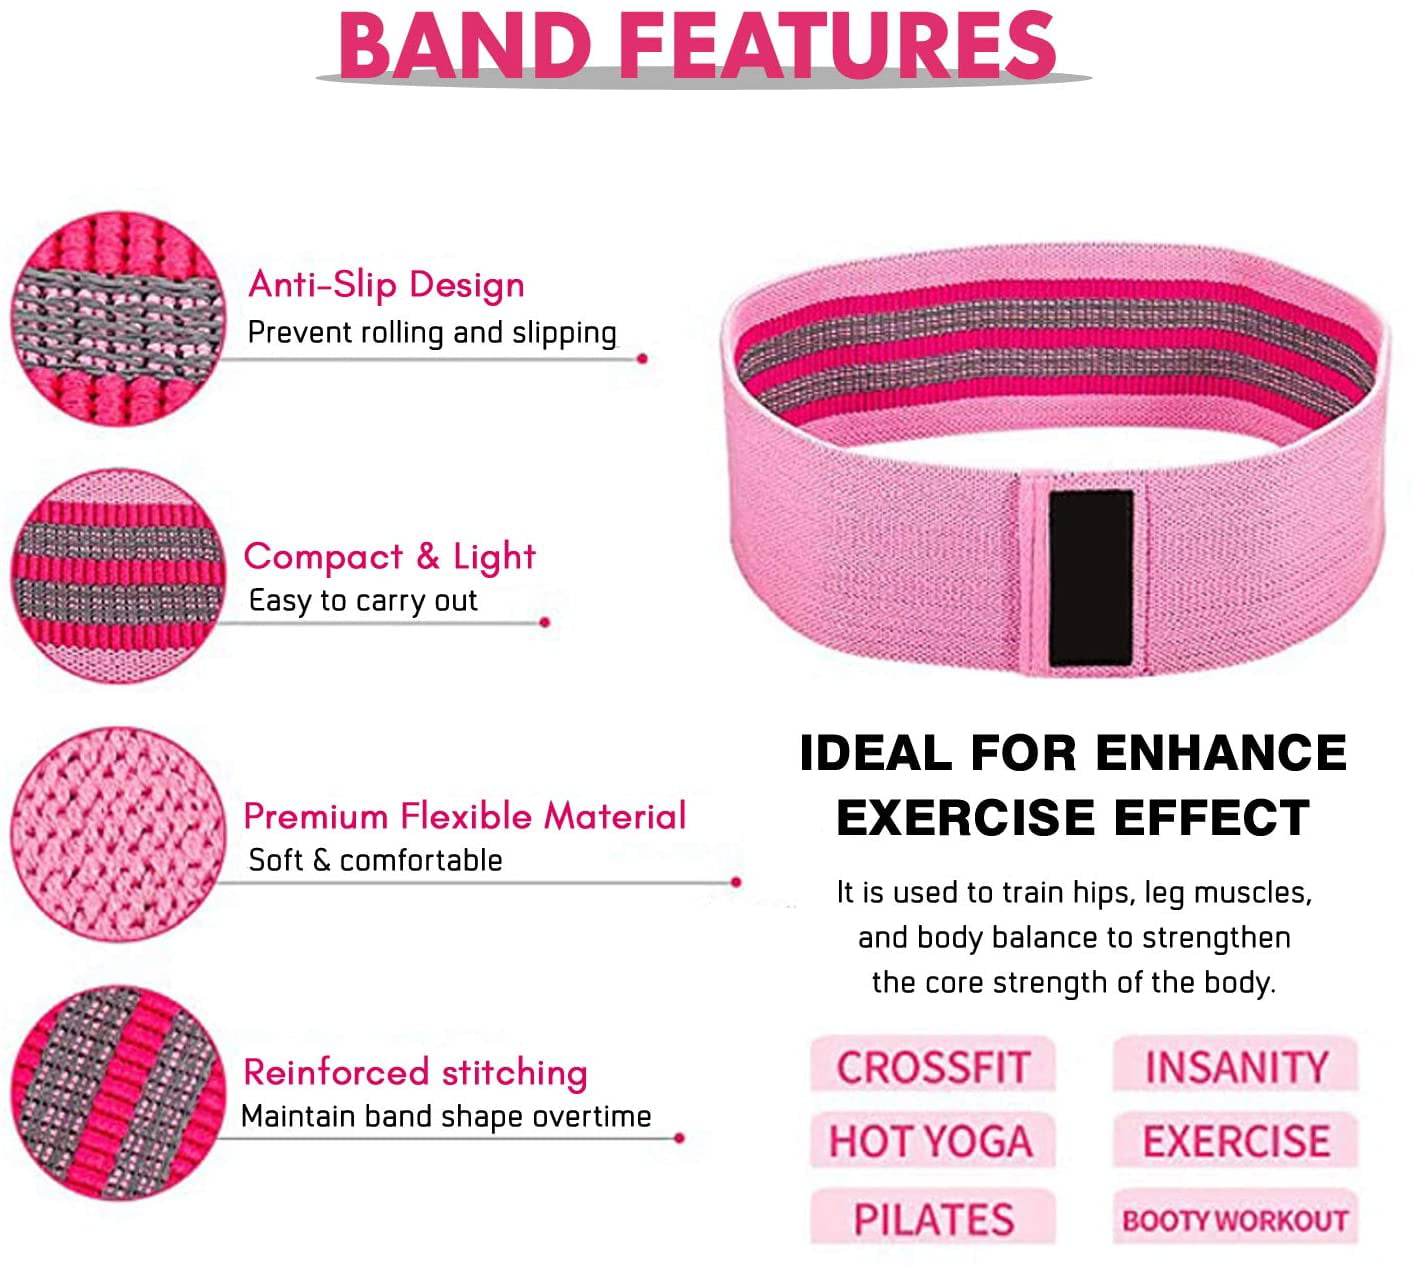 Yoga and Pilates Hip Circle Band for Leg Exercise Resistance bands 3 level Booty Band Set 3 Pack Unisex Durable Fitness Band Non-Slip Loop Bands for Hips and Glutes